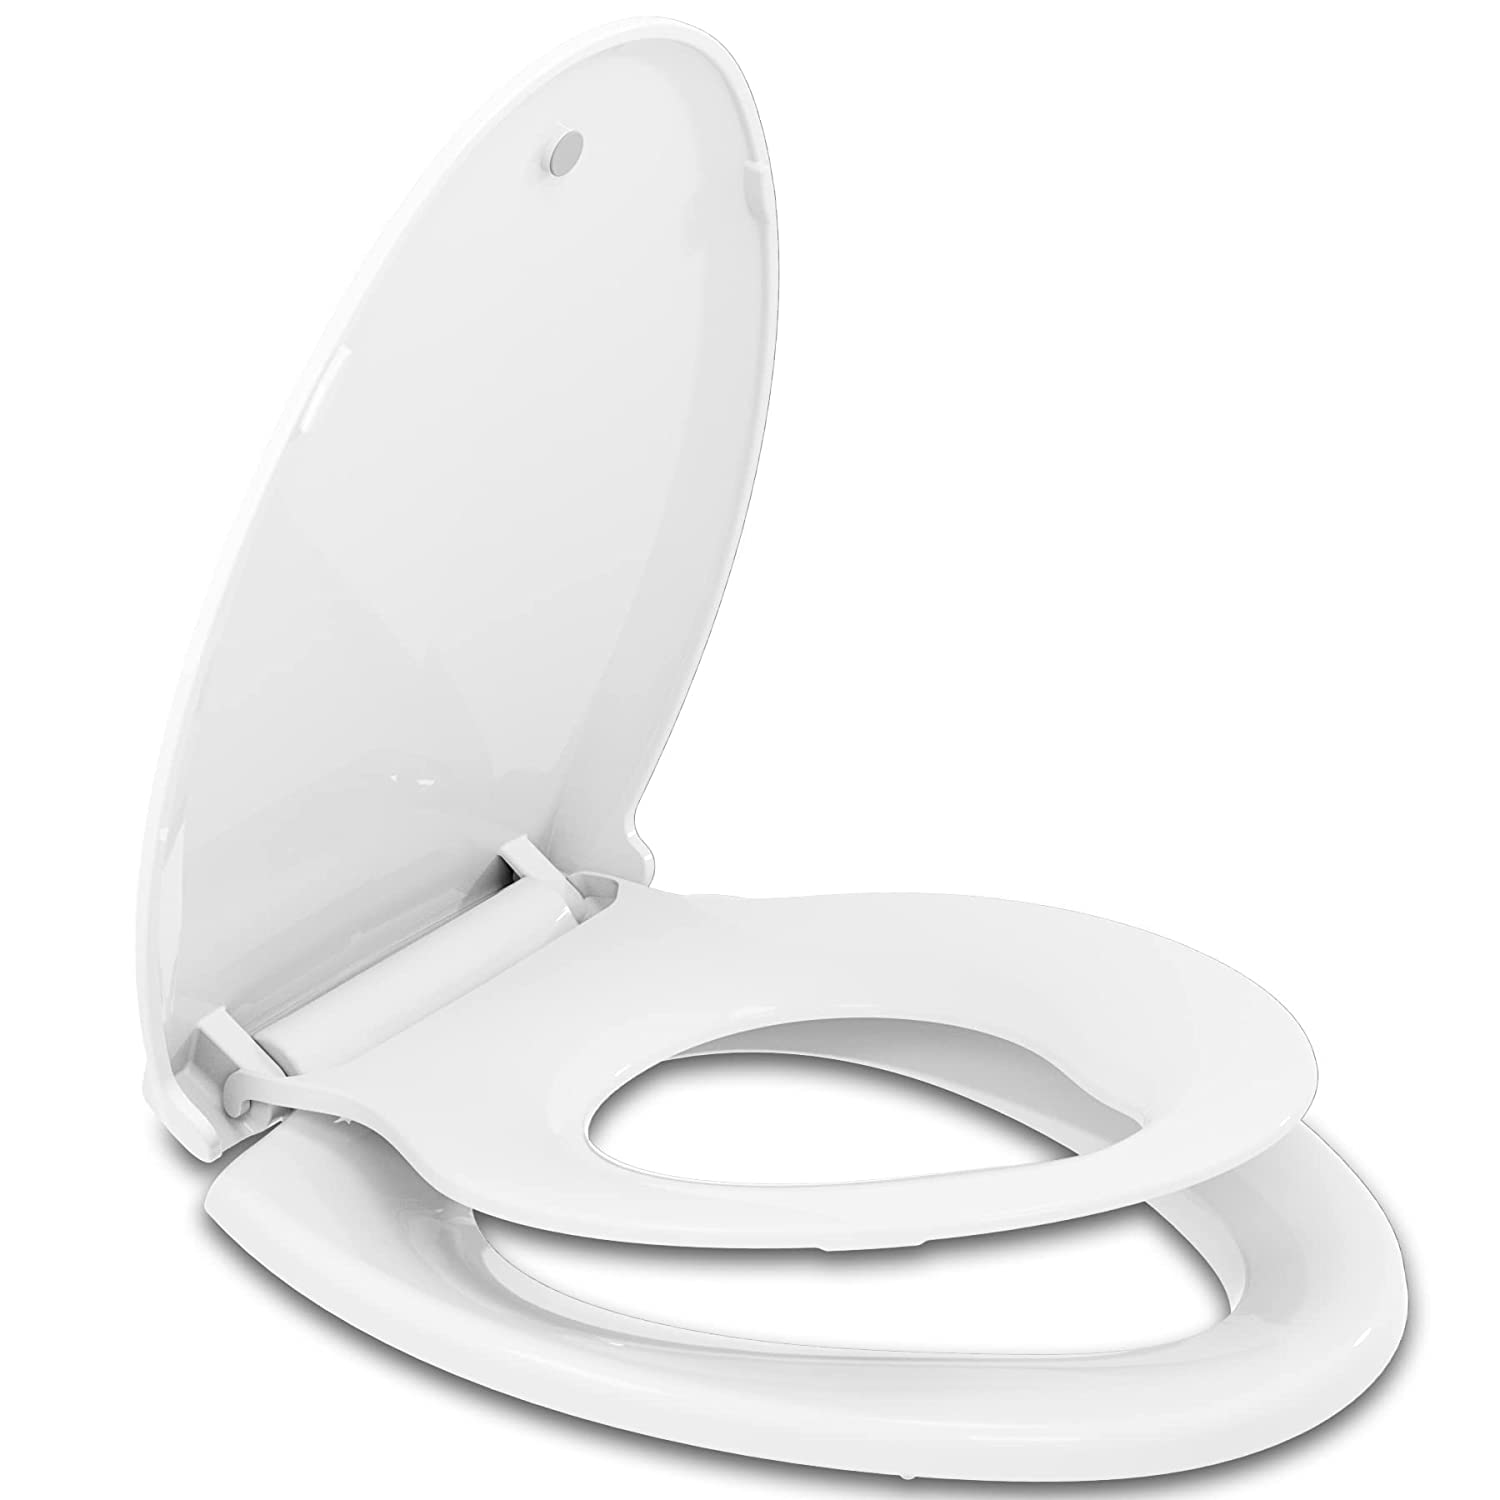 Hibbent Elongated Toilet Seat with Built-in Potty Training Seat